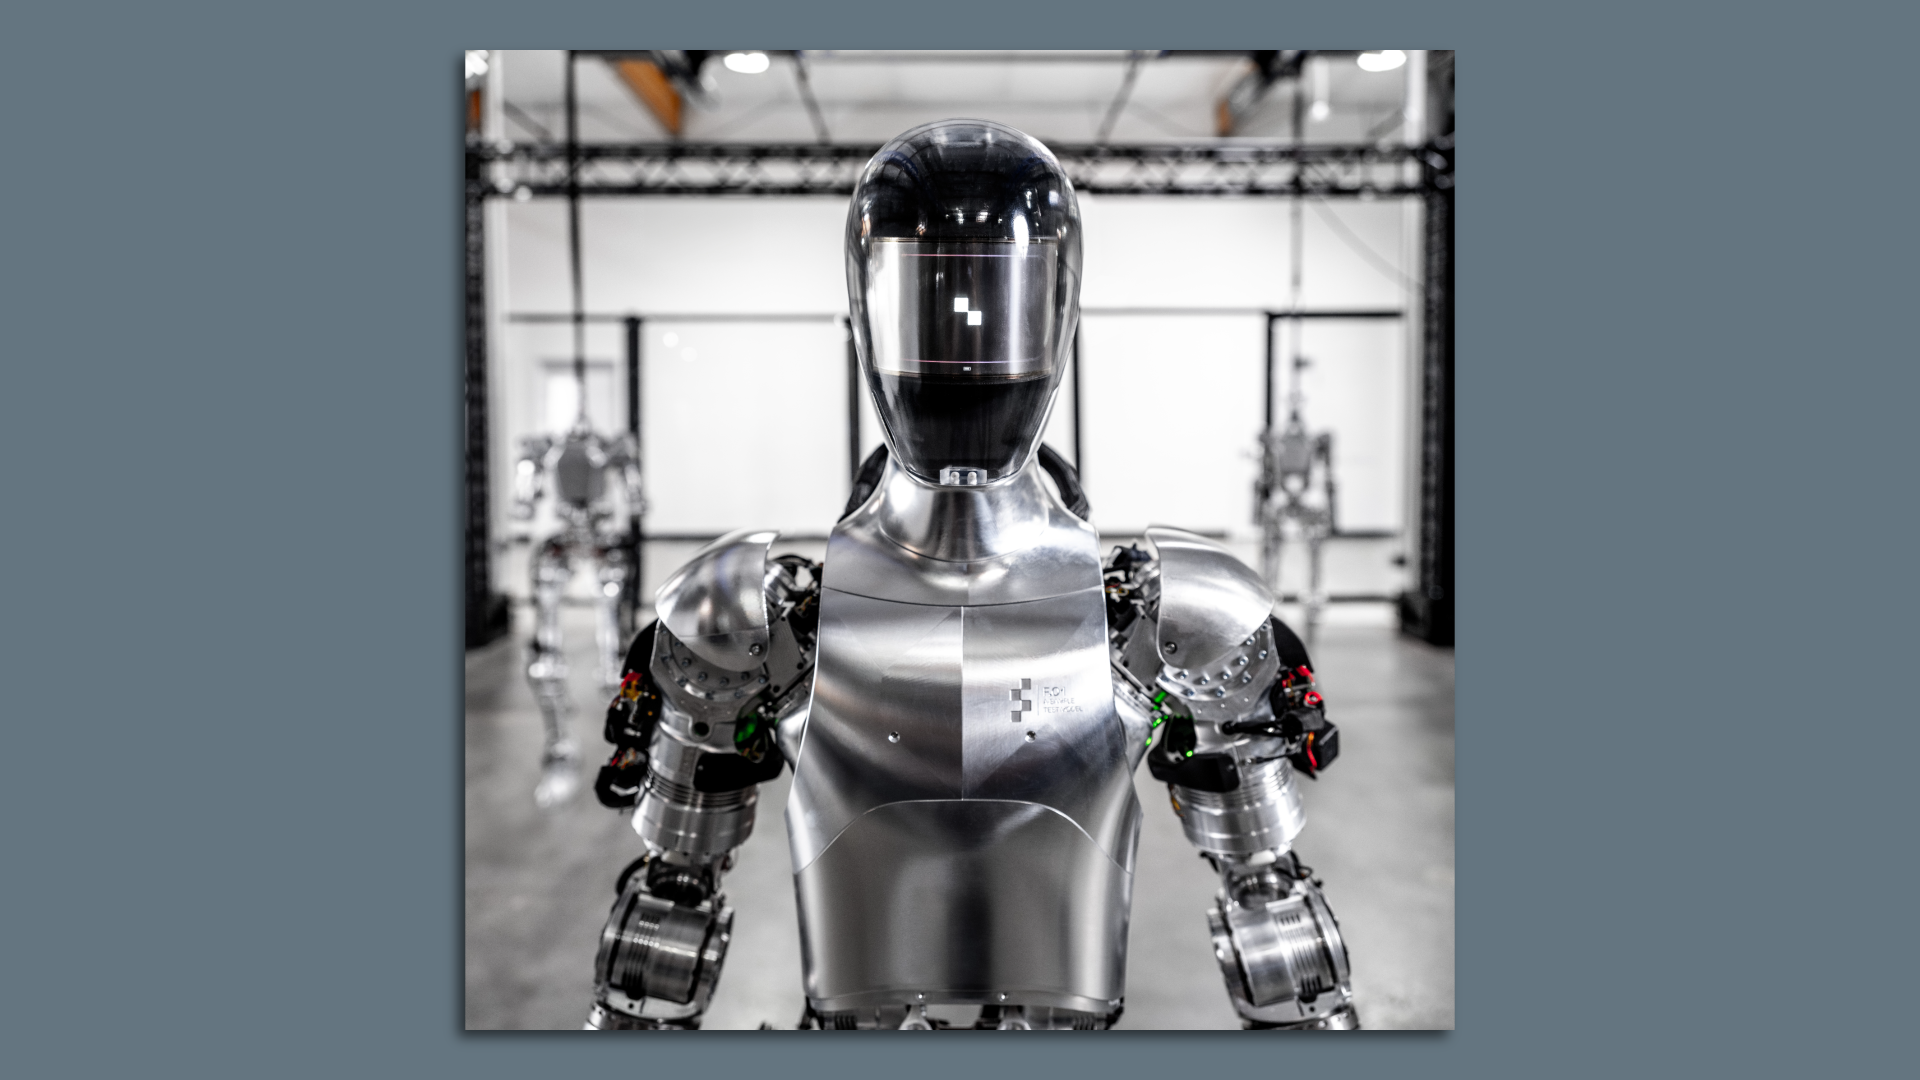 The head and torso of a humanoid robot.